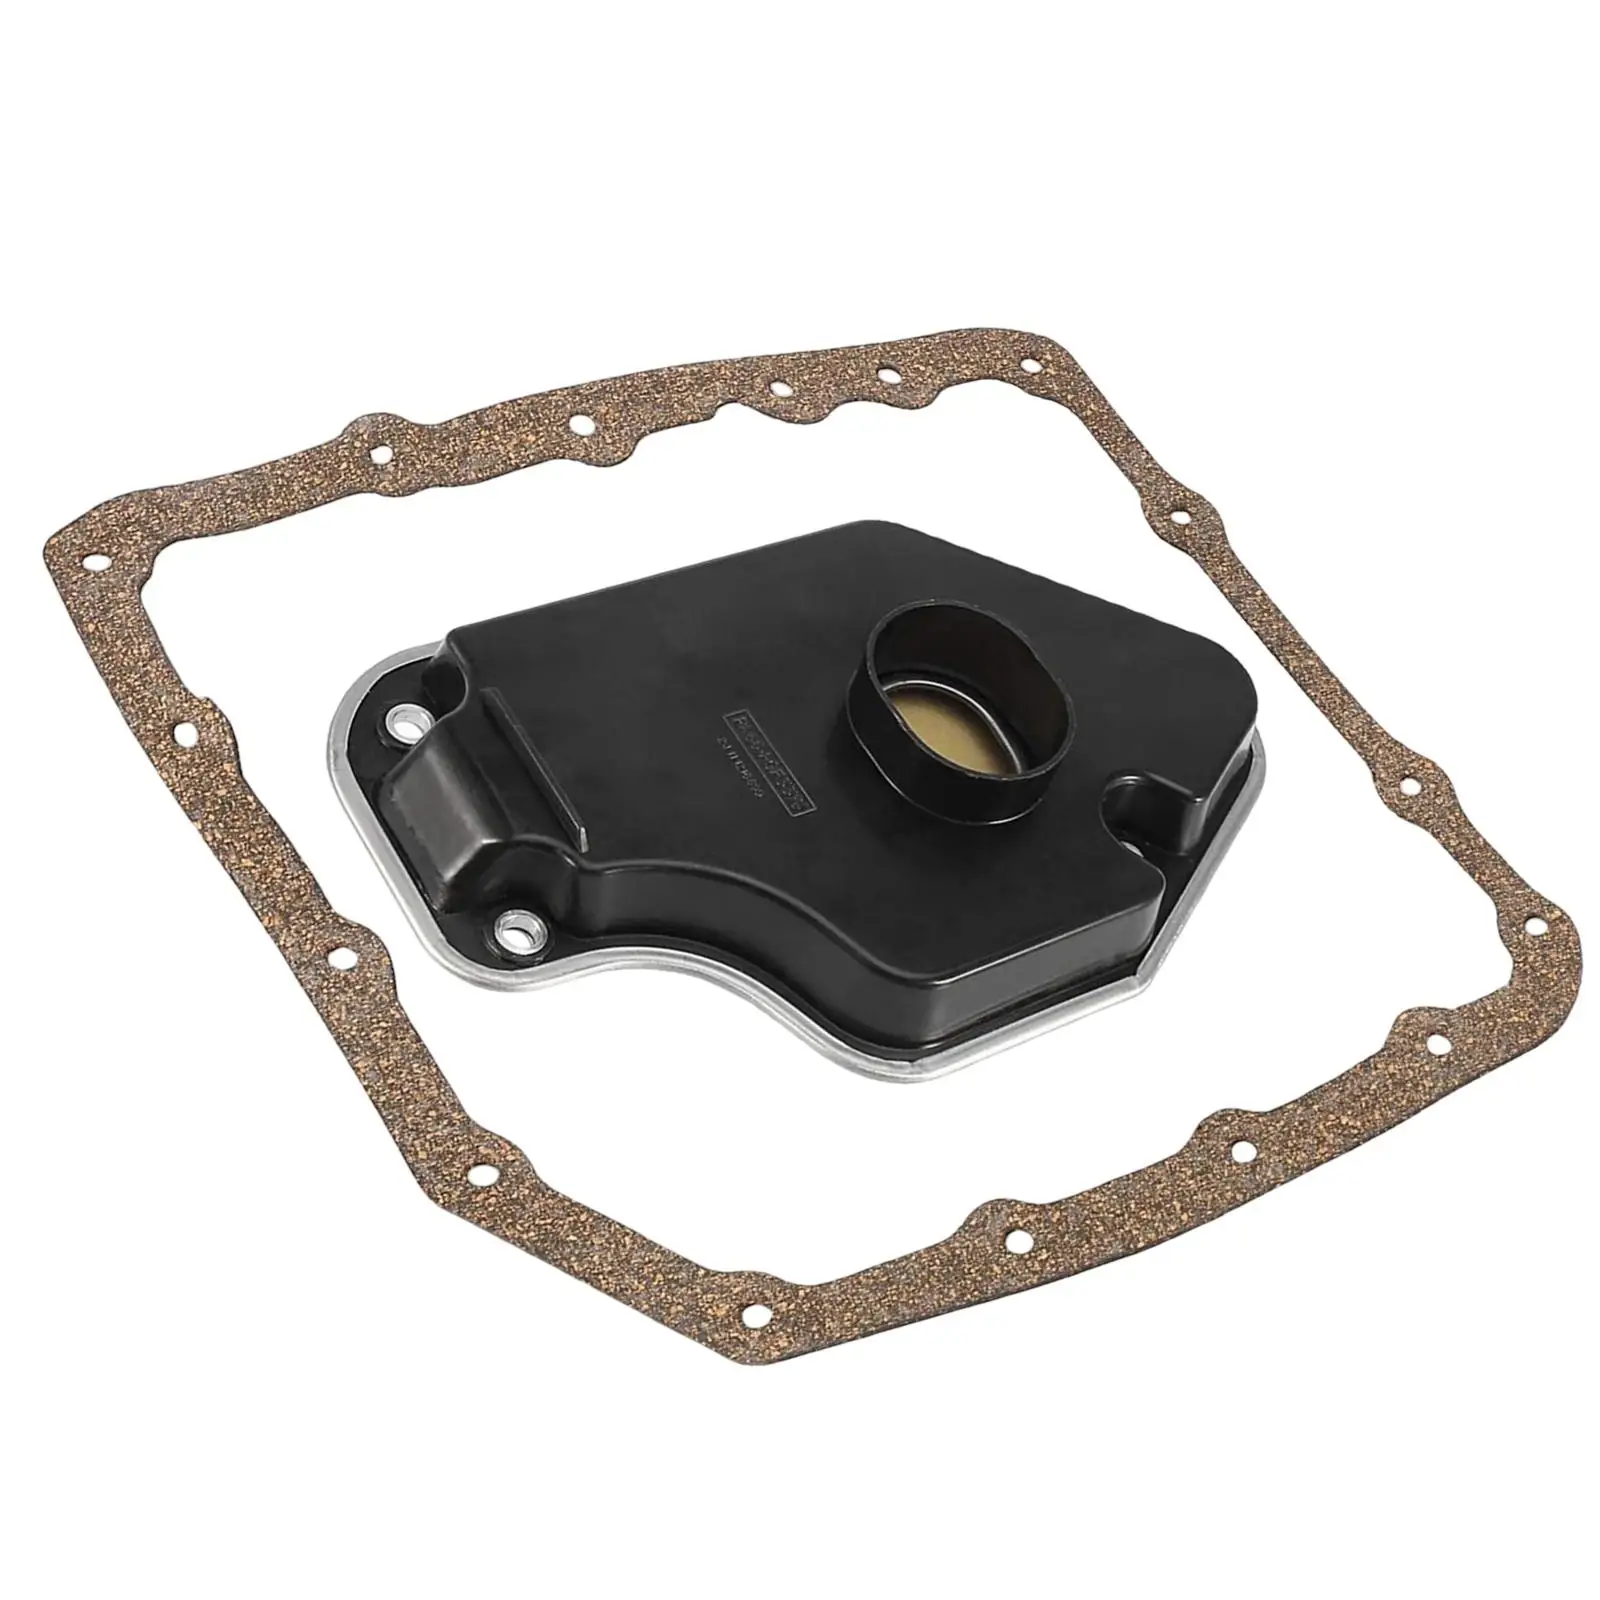 Auto Transmission Filter Oil Pan Gasket Fits for BMW 96015432 Replace 24111-218-899